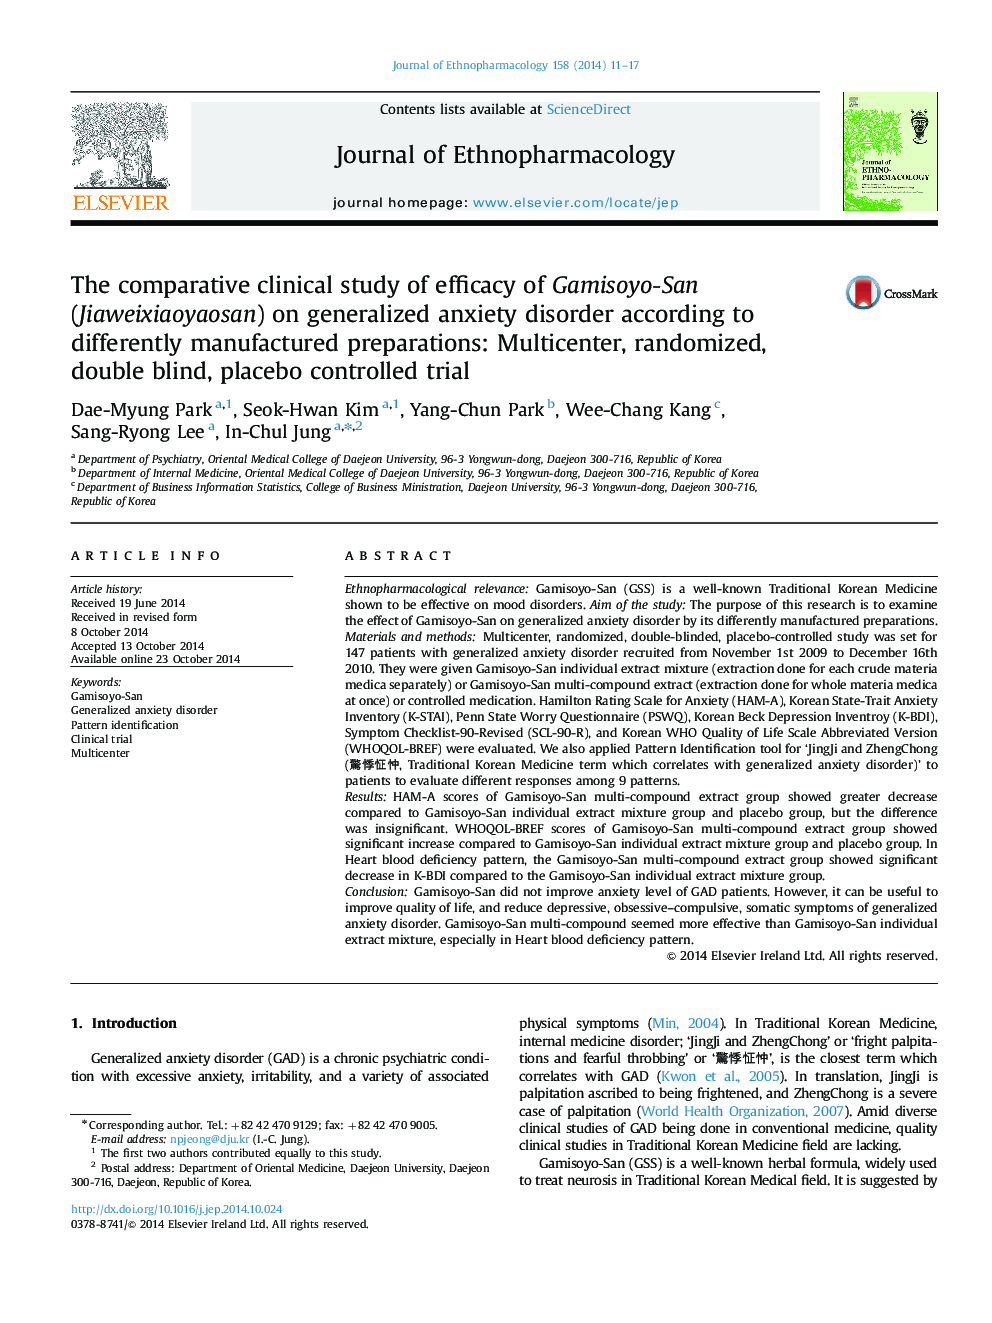 The comparative clinical study of efficacy of Gamisoyo-San (Jiaweixiaoyaosan) on generalized anxiety disorder according to differently manufactured preparations: Multicenter, randomized, double blind, placebo controlled trial